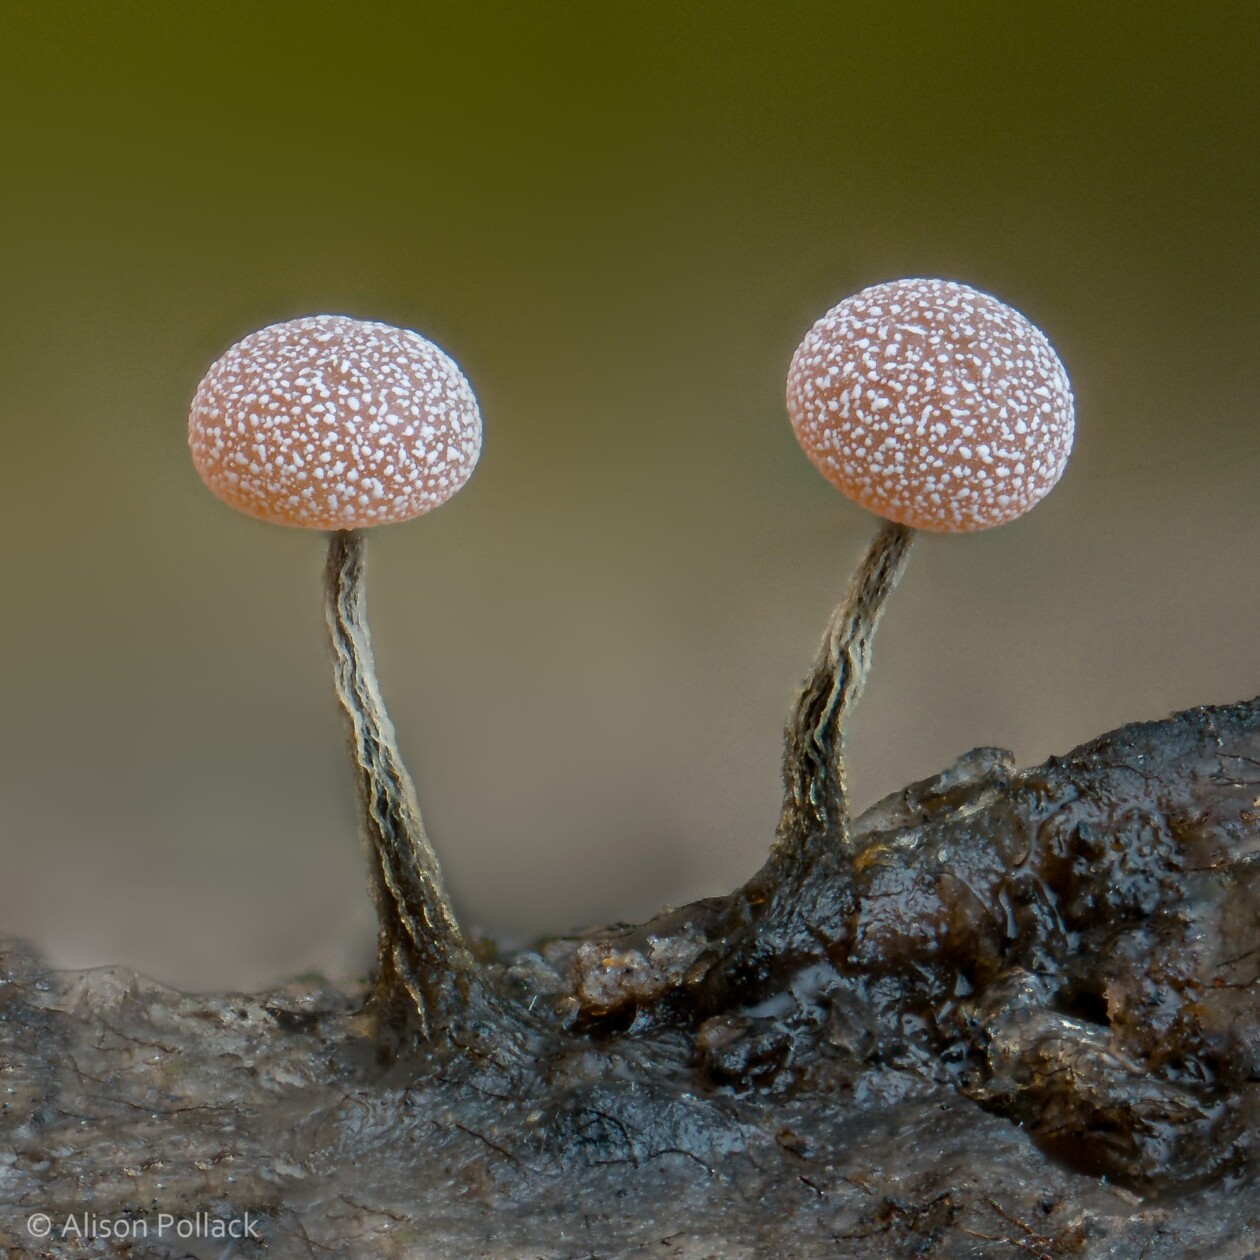 The Microscopic Majesty Of Mushrooms And Molds Captured By Alison Pollack (10)